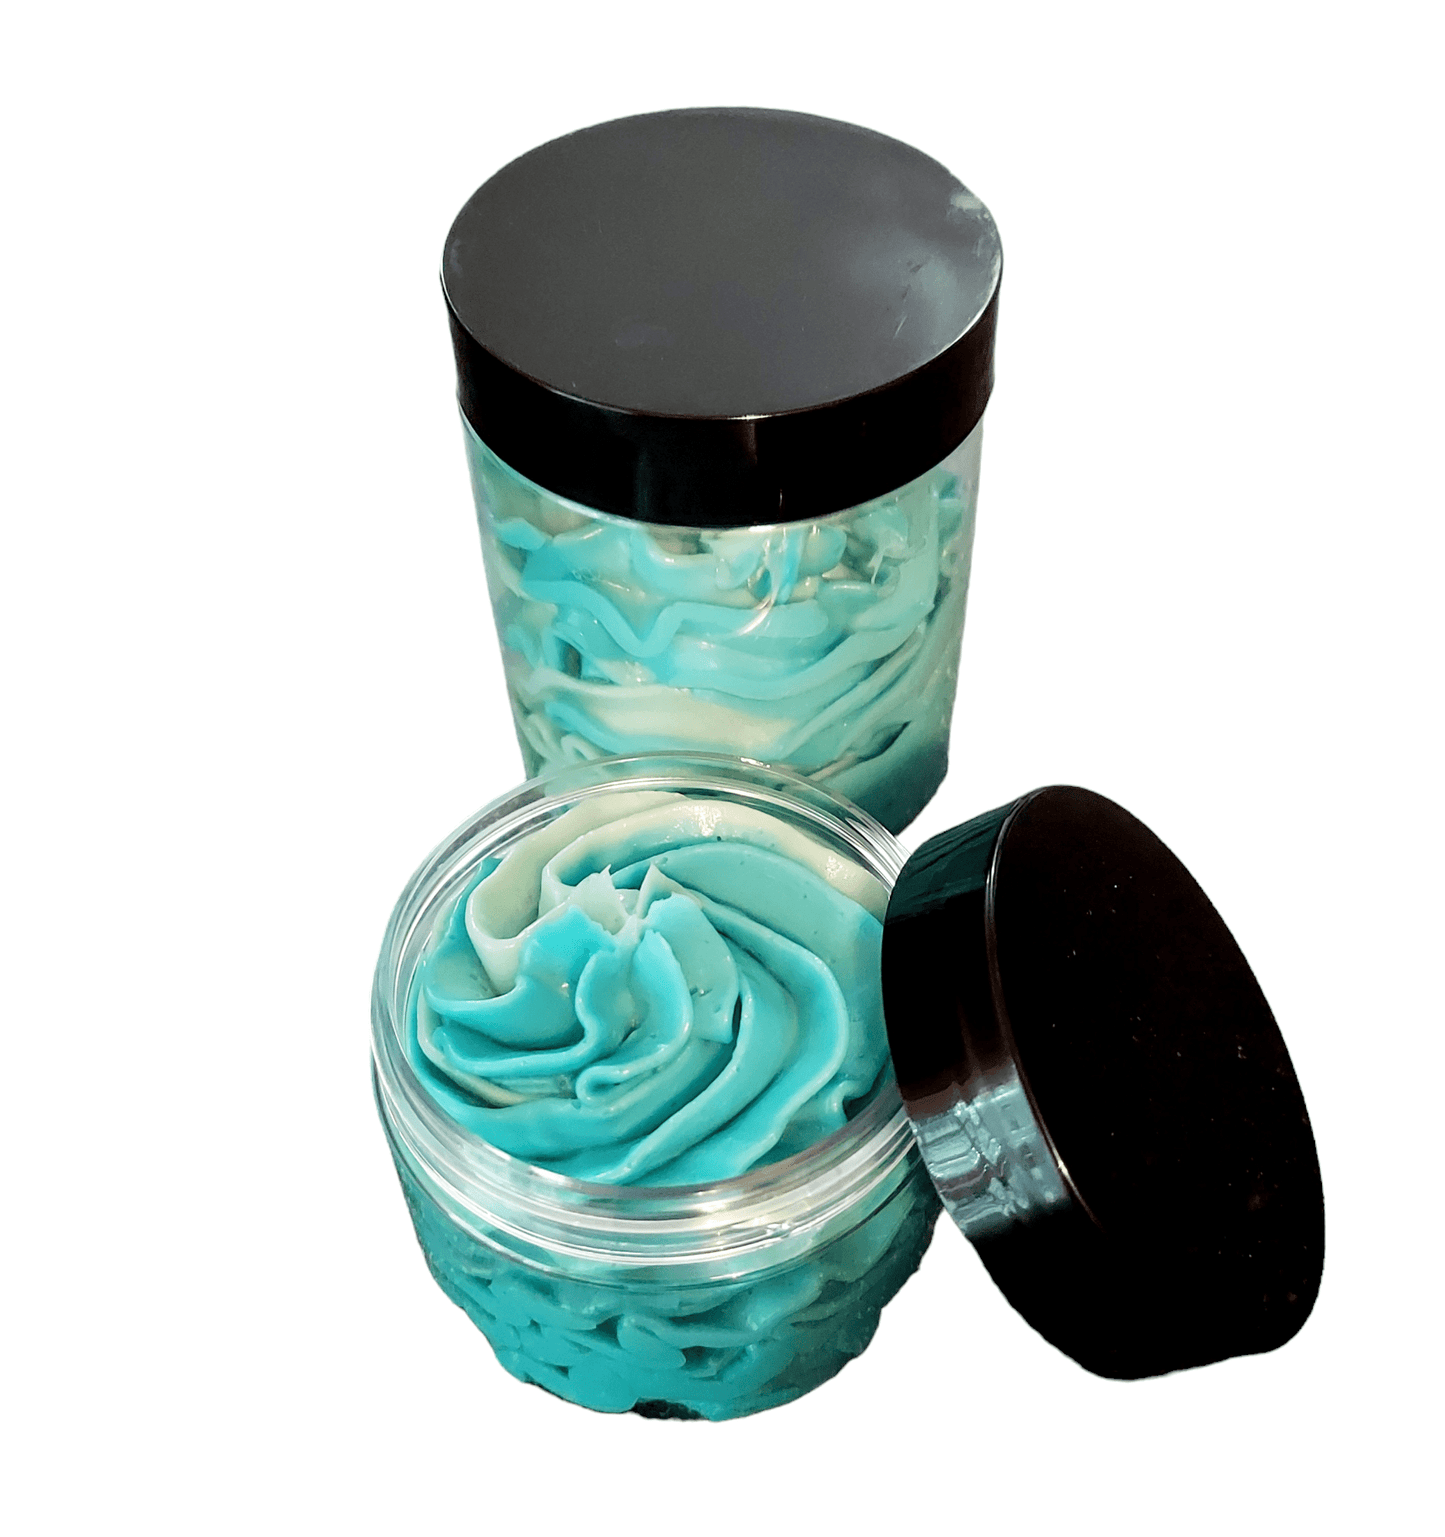 Blue Cotton Candy Body Butter